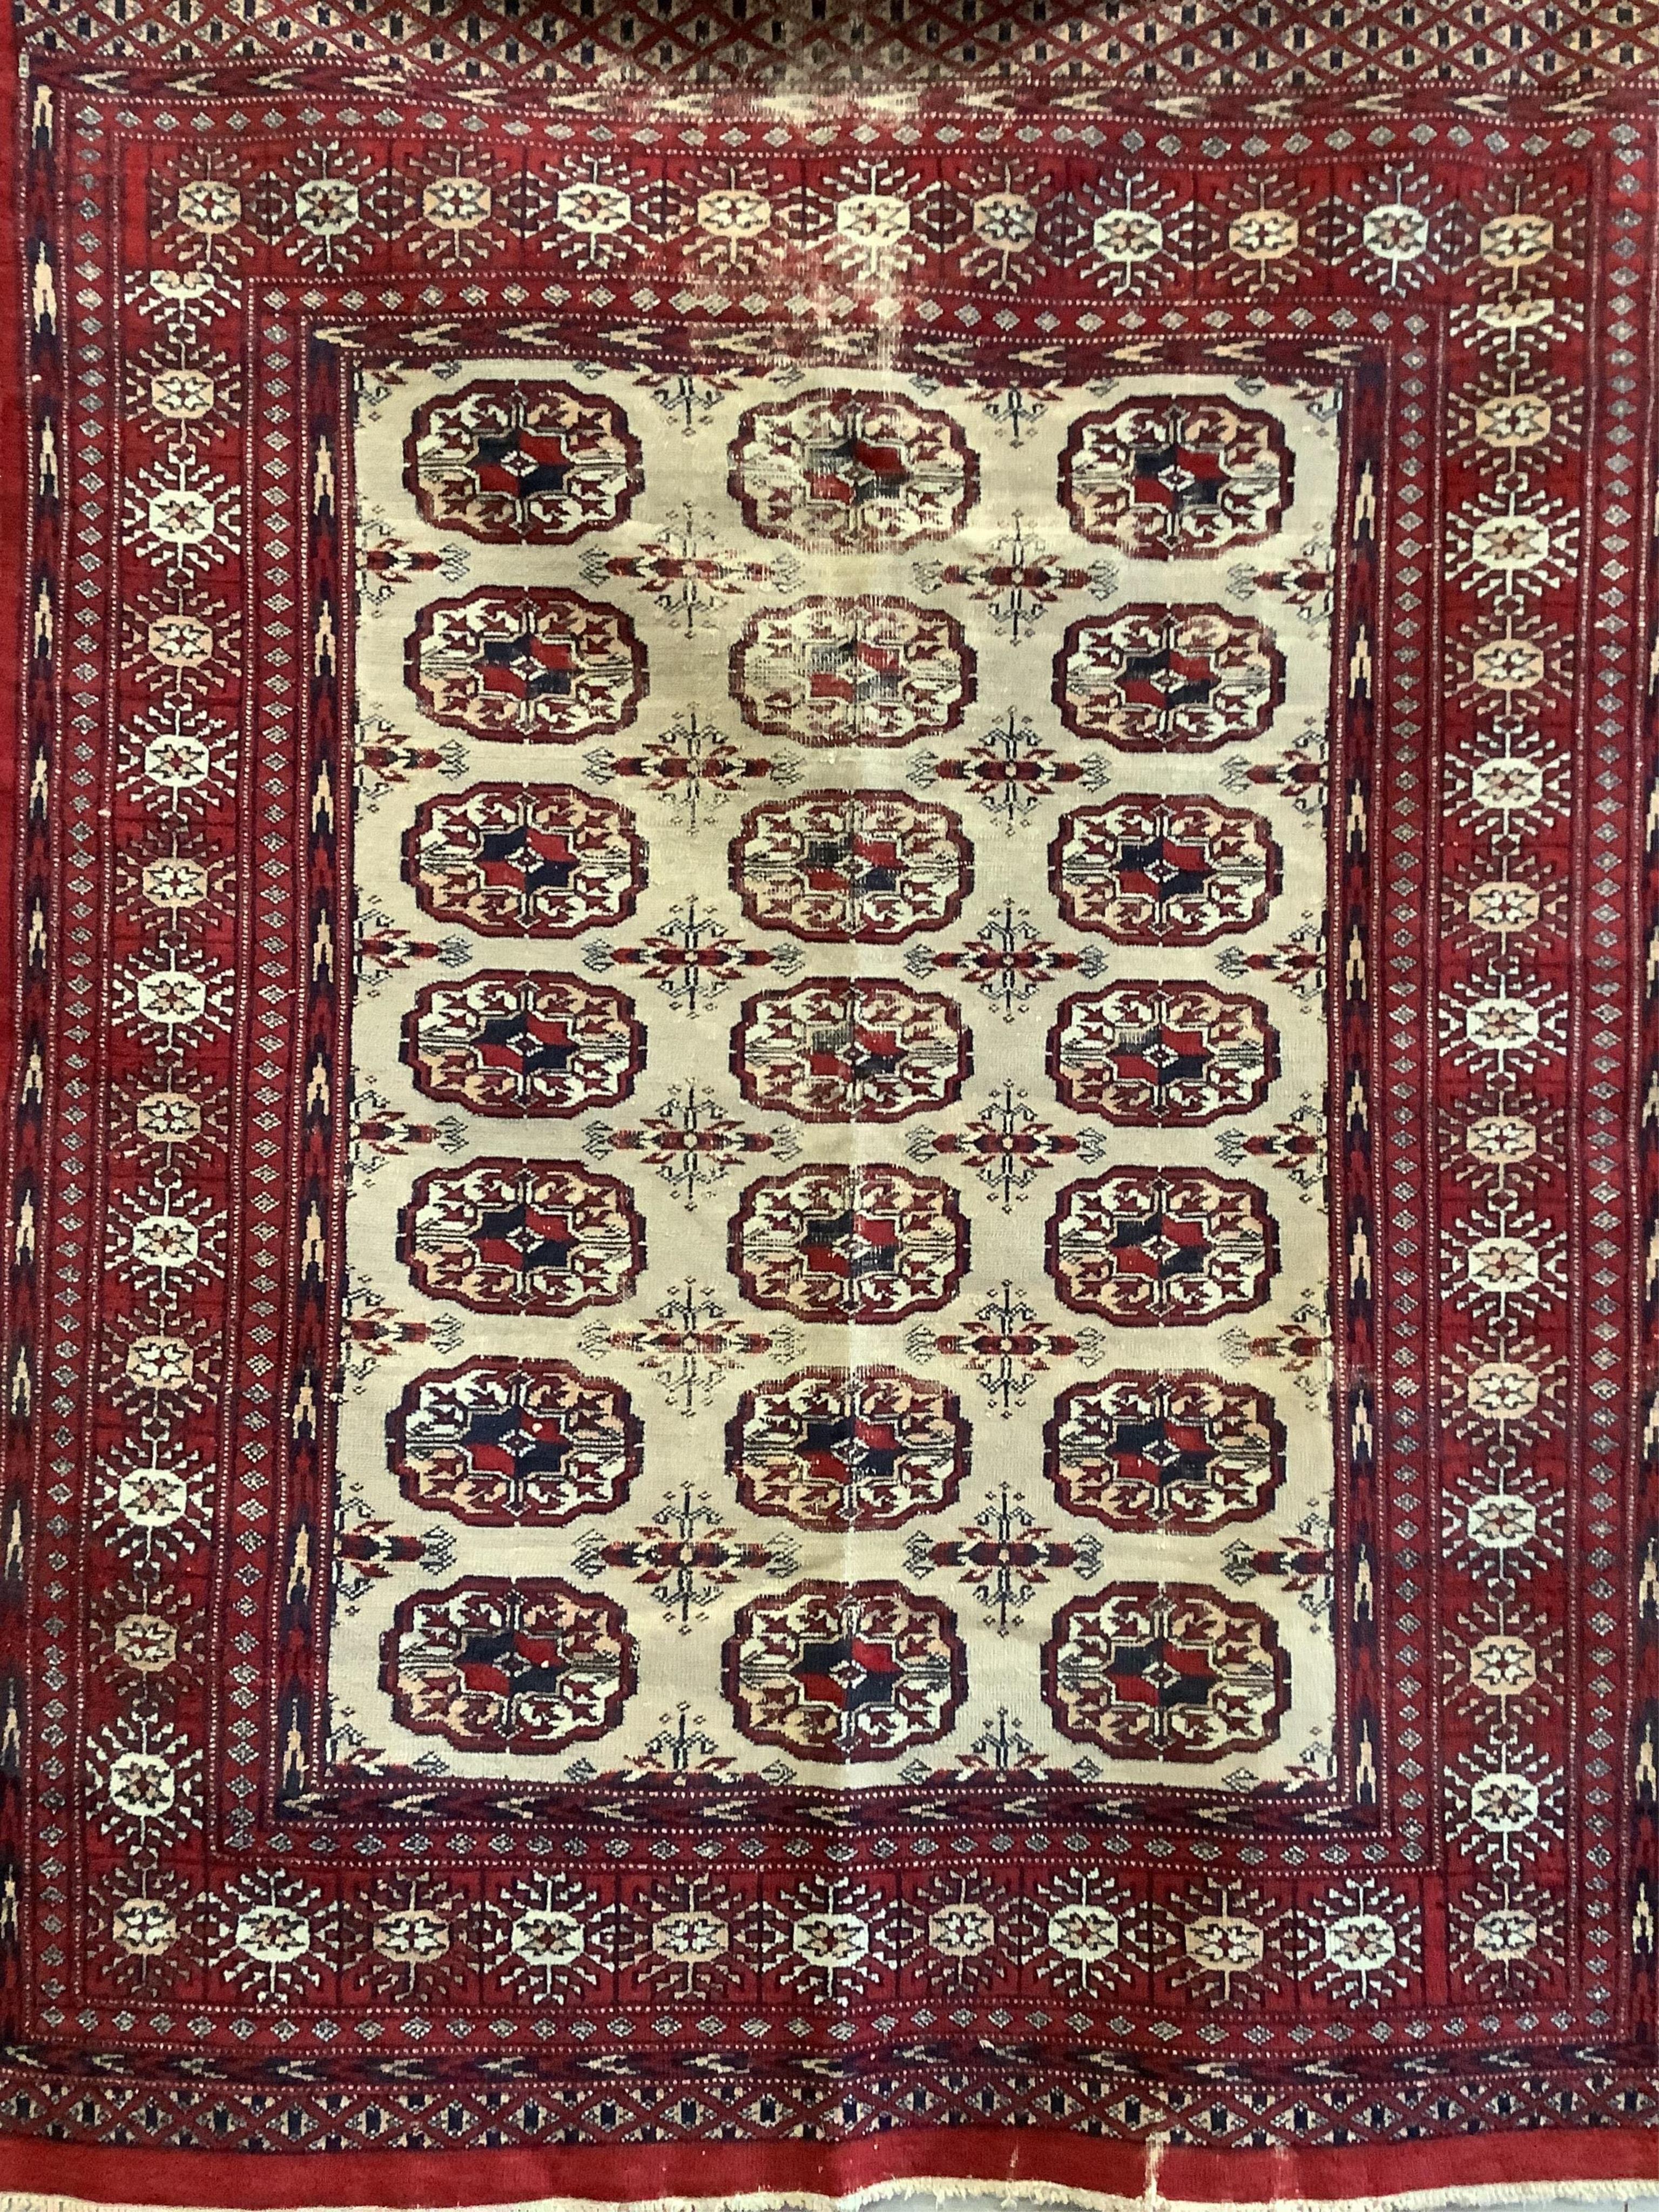 Two Bokhara rugs, larger 182 x 125cm. Condition - fair to poor